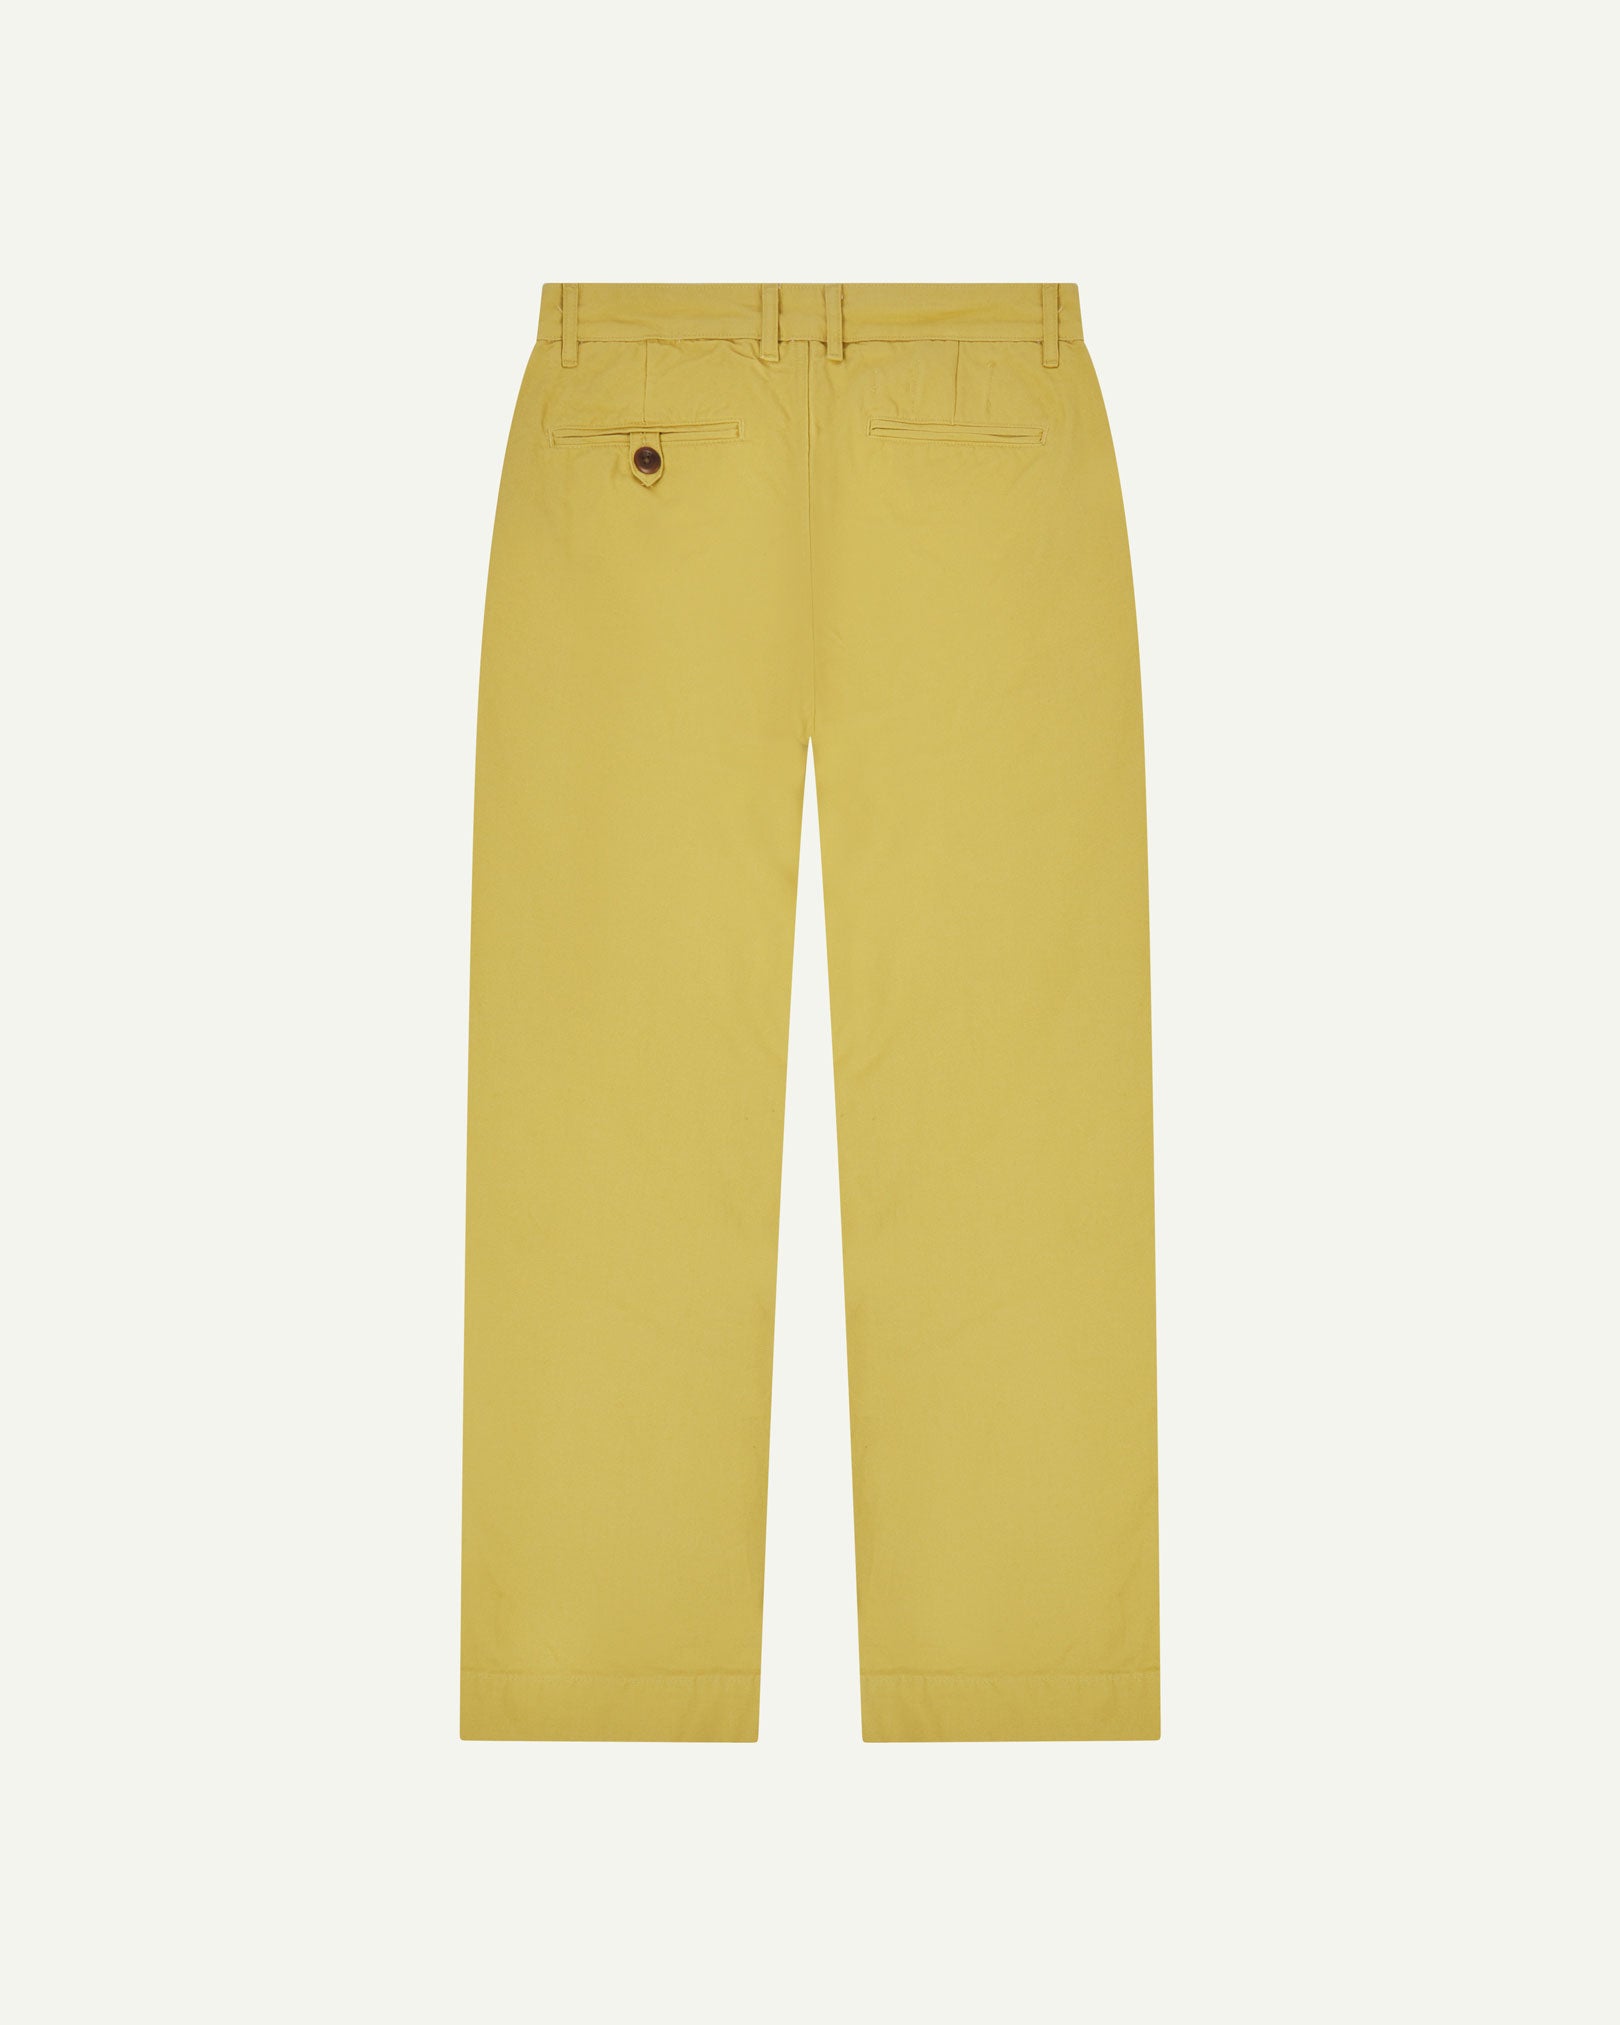 Back view of 5018 Uskees men's organic mid-weight cotton boat trousers in acid yellow (citronella) showing wide leg style and buttoned back pocket.